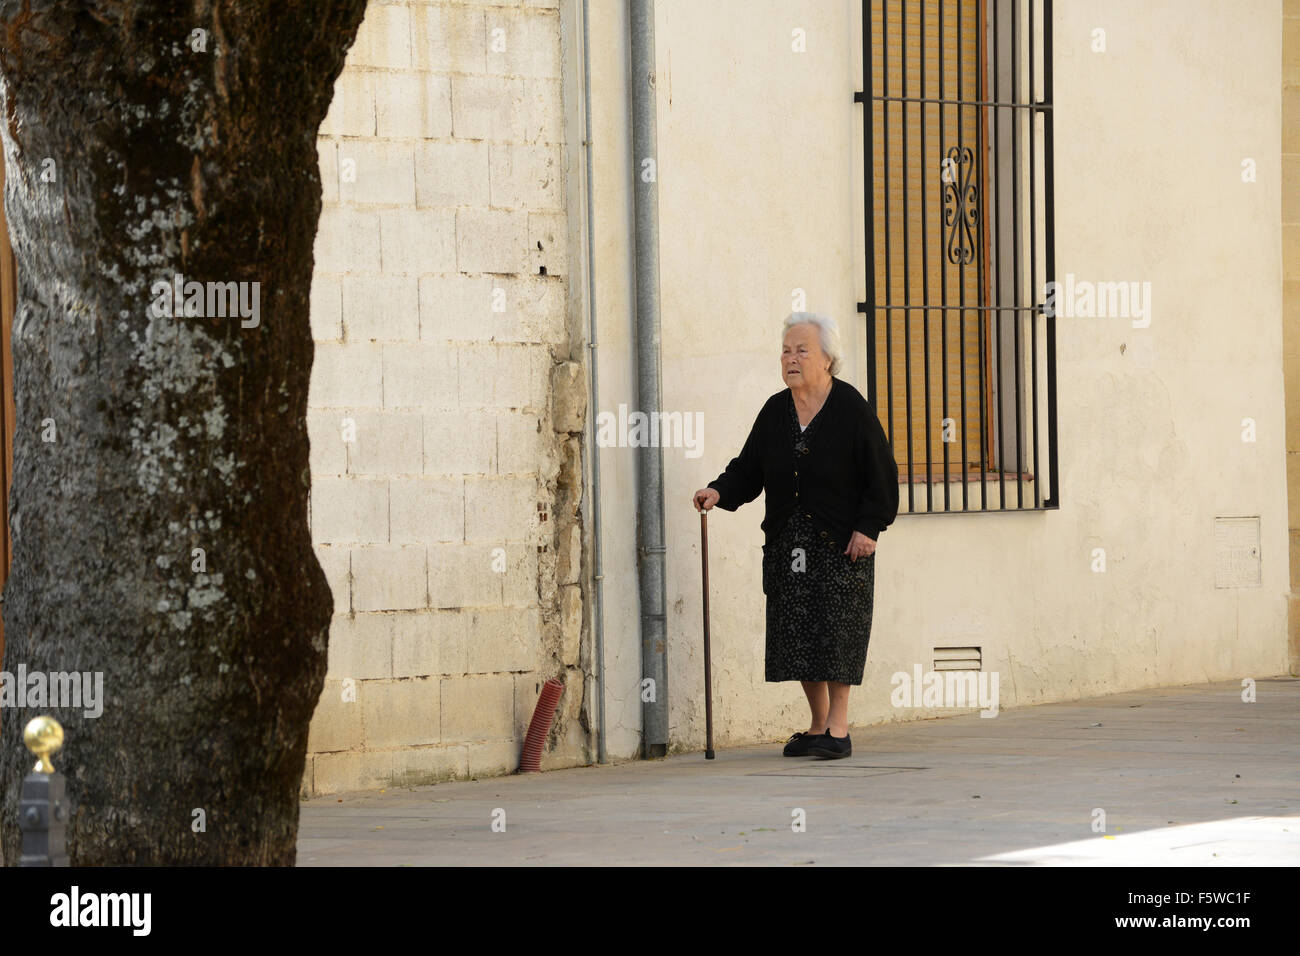 Old woman lady taking daily exercise walking in Ubeda Spain Stock Photo